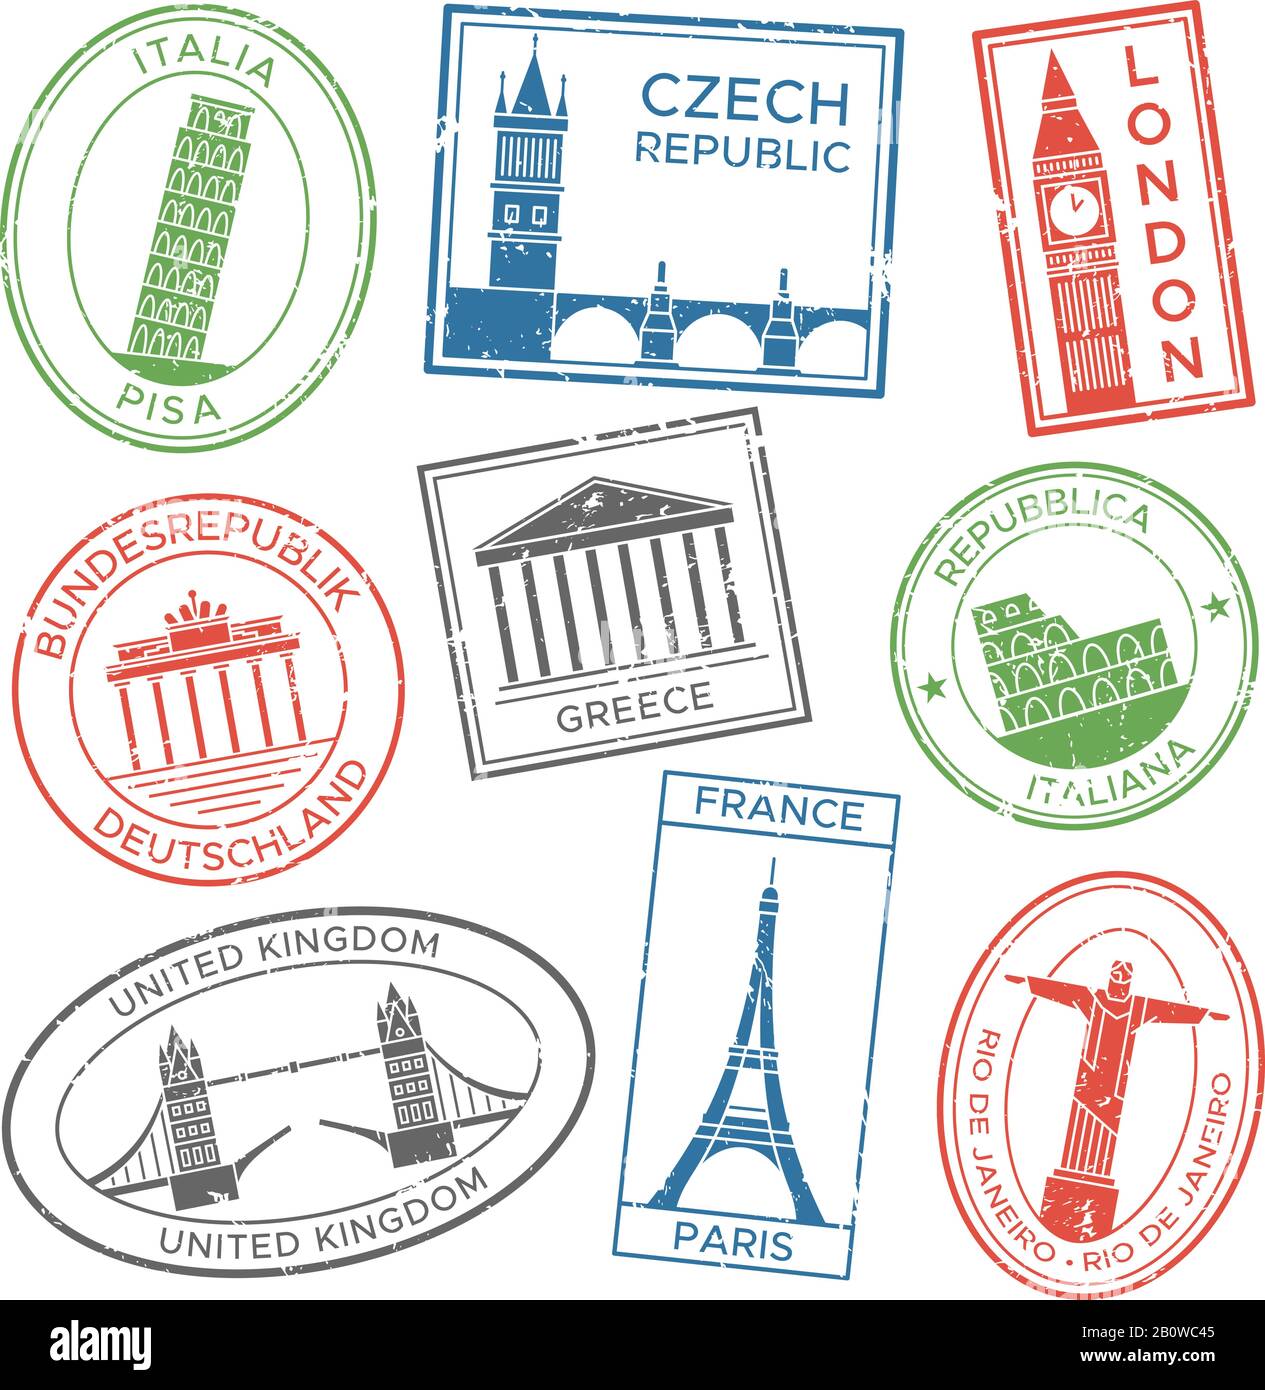 Postcard stamp Cut Out Stock Images & Pictures - Alamy